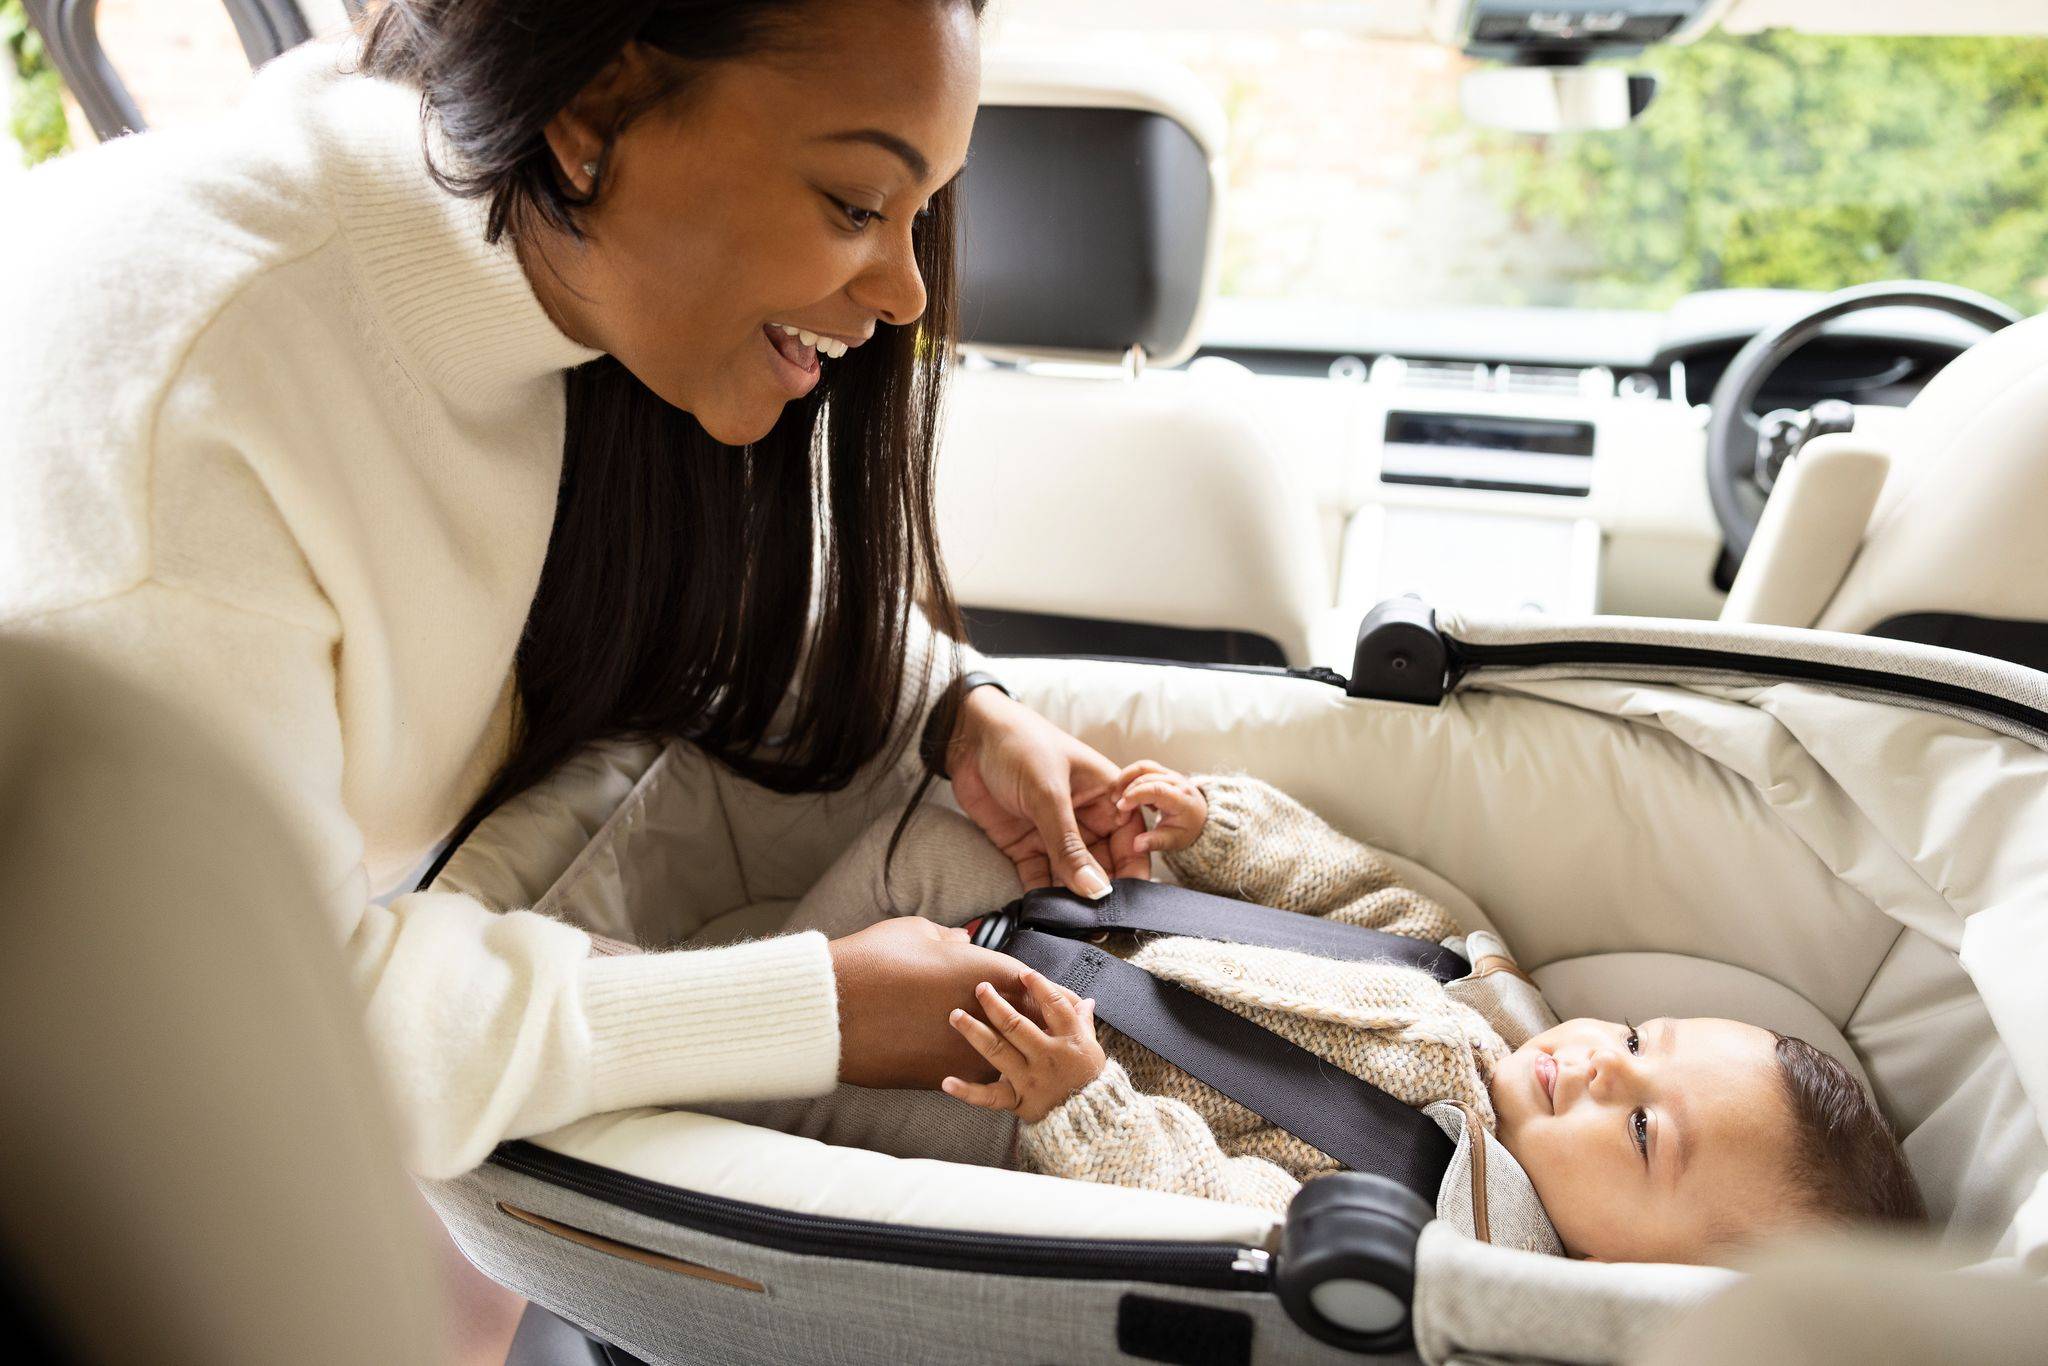 BeSafe: Developing the safest possible car seats for children of all ages